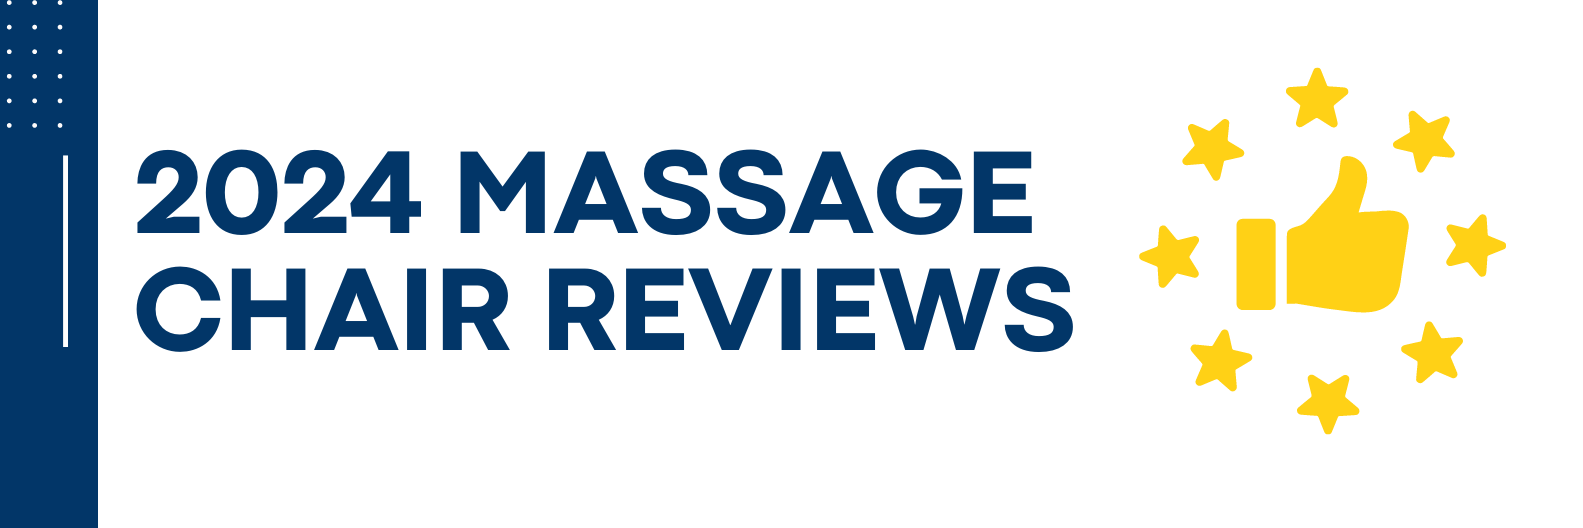 The Modern Back has compiled a wealth of comprehensive massage chair reviews, meticulously crafted to empower you in making an informed buying decision.